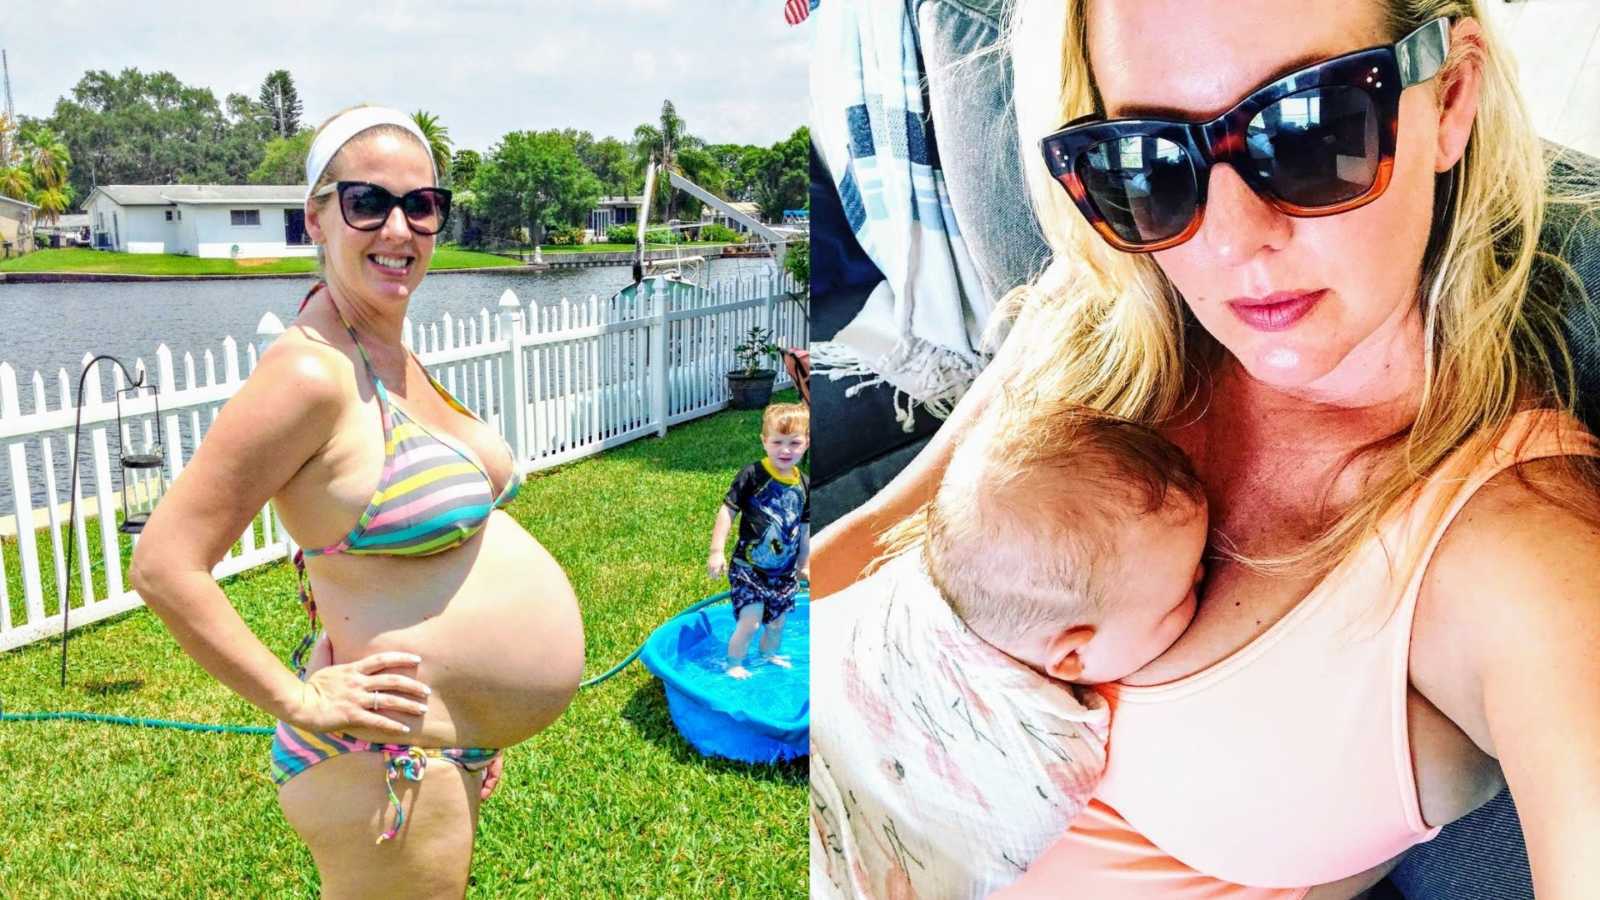 Body hot moms I Have The Perfect Body I Really Do Mom Shamelessly Celebrates Thick Swollen Body After Multiple Pregnancies Admits It S Pretty Darn Incredible Love What Matters